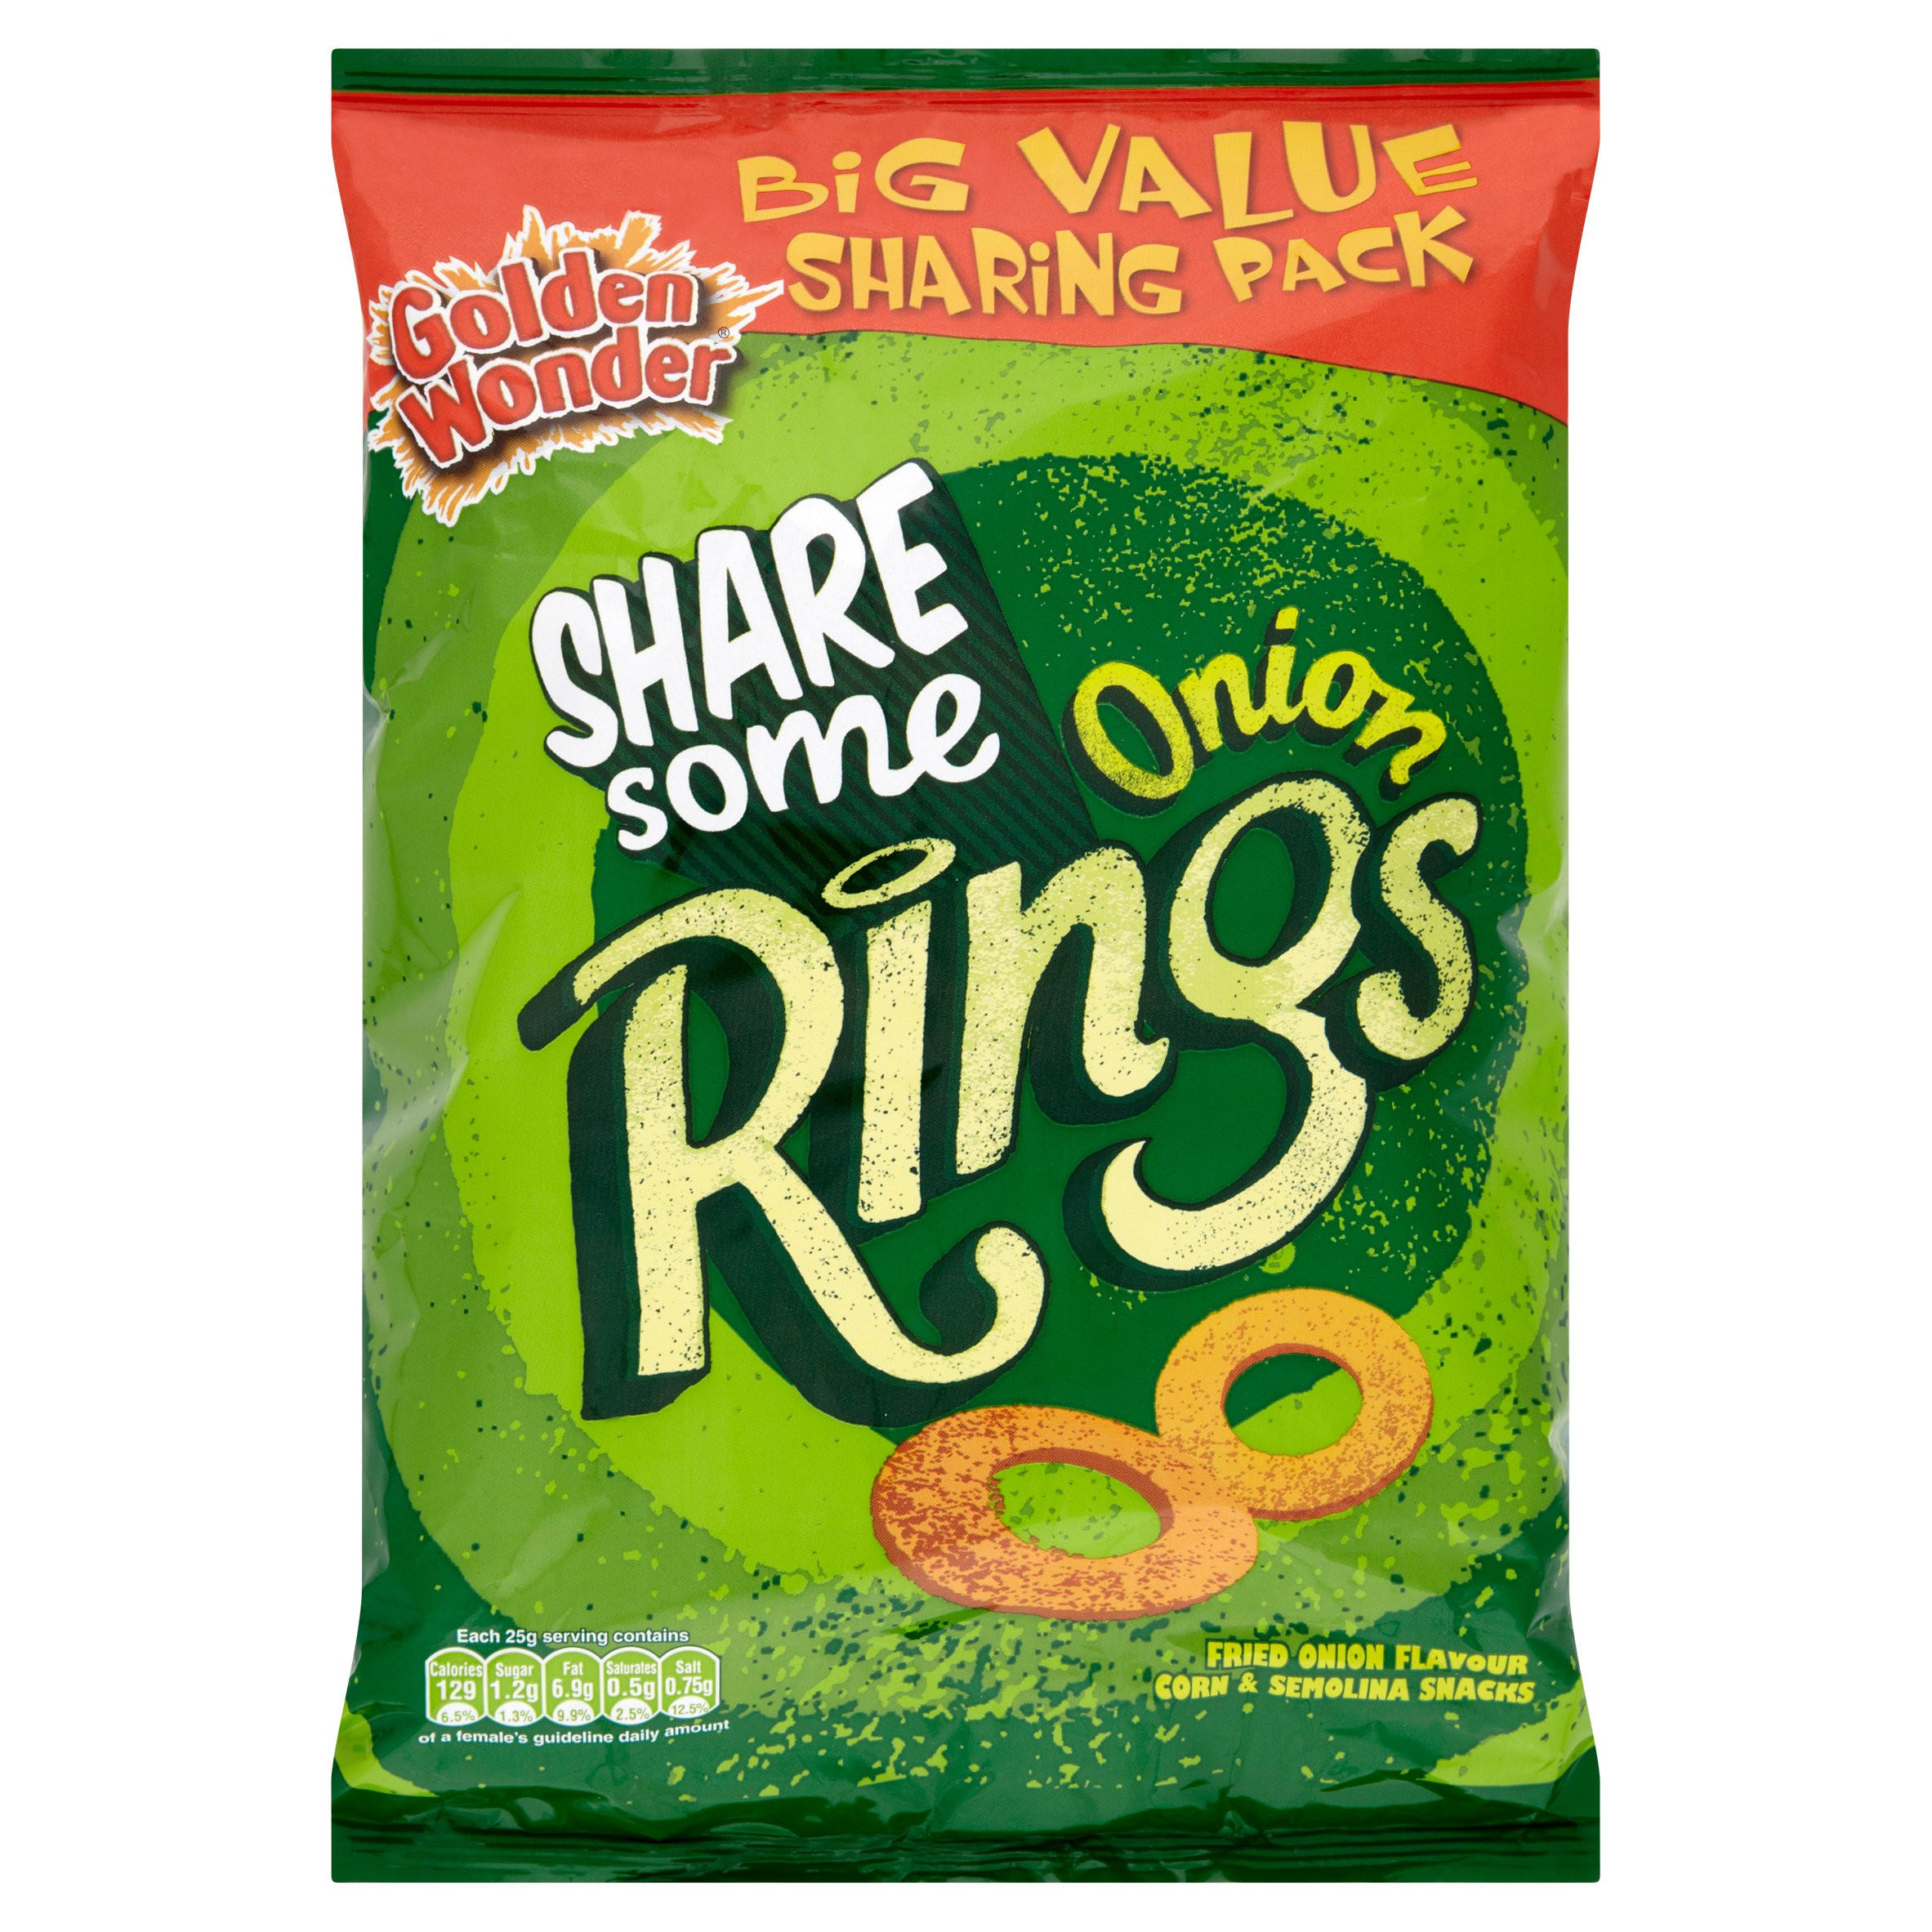 New Onion Rings from Thins - Retail World Magazine